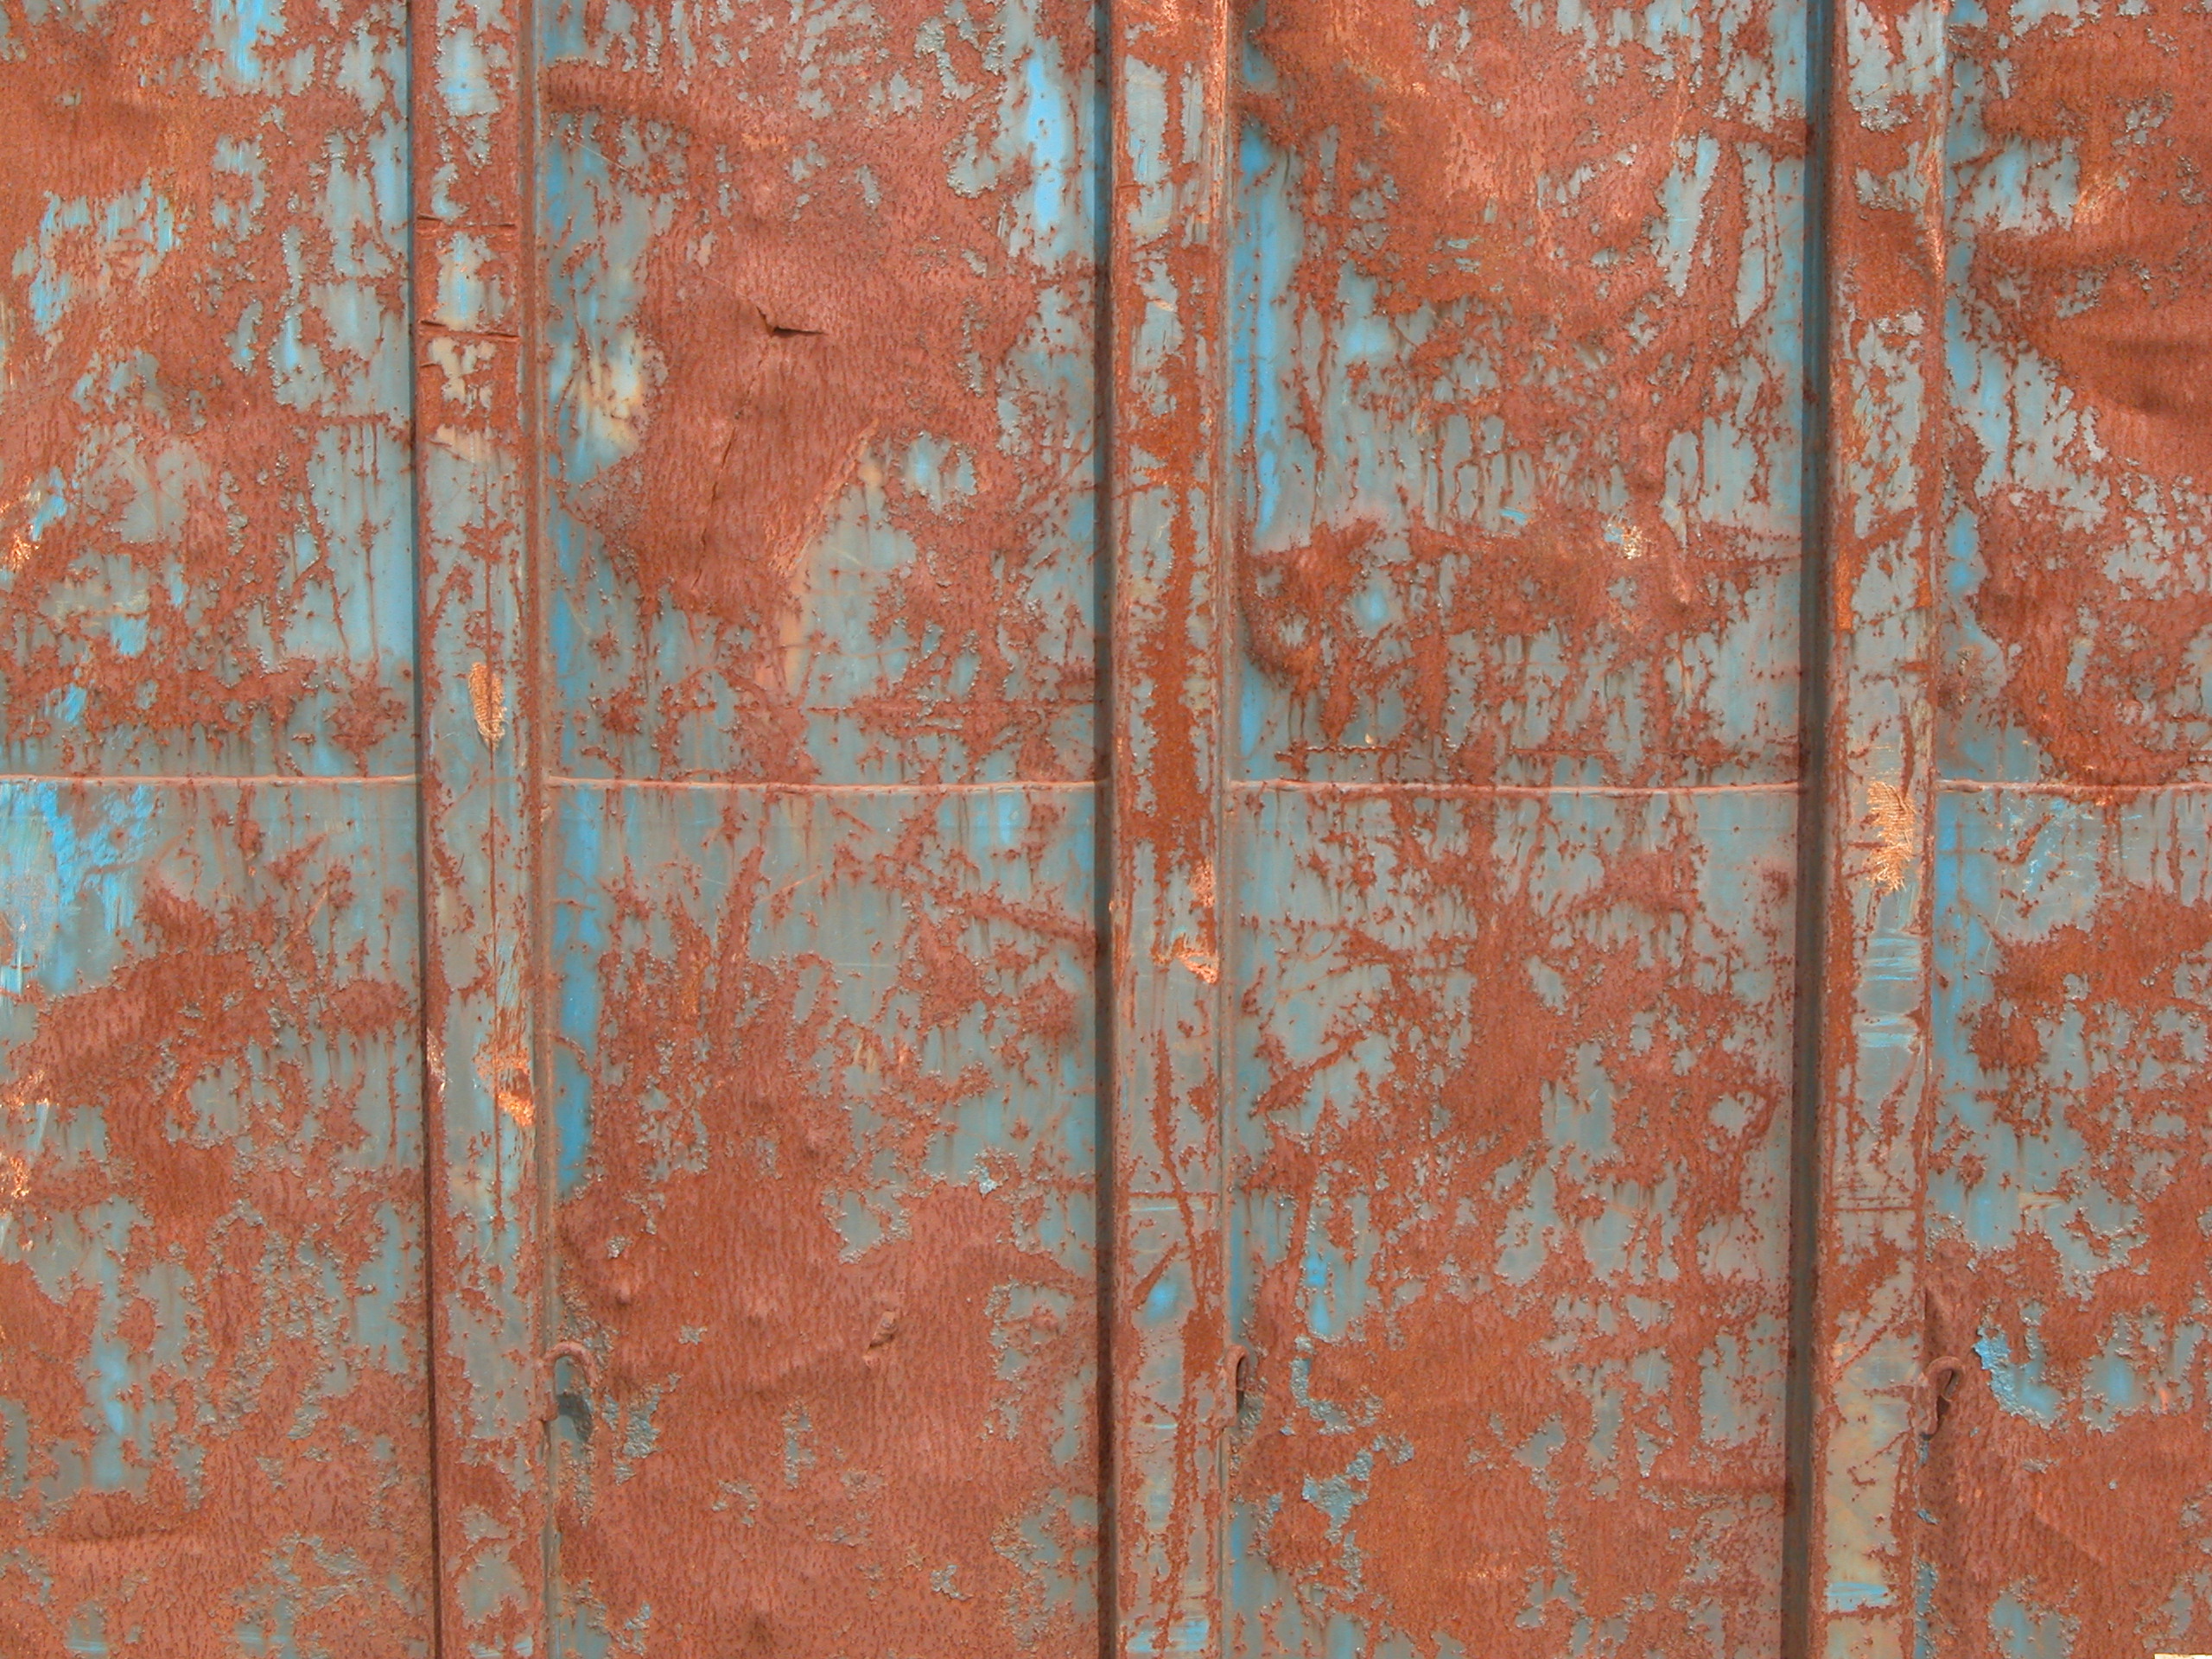 Image*After : textures : rusty rust metal container side